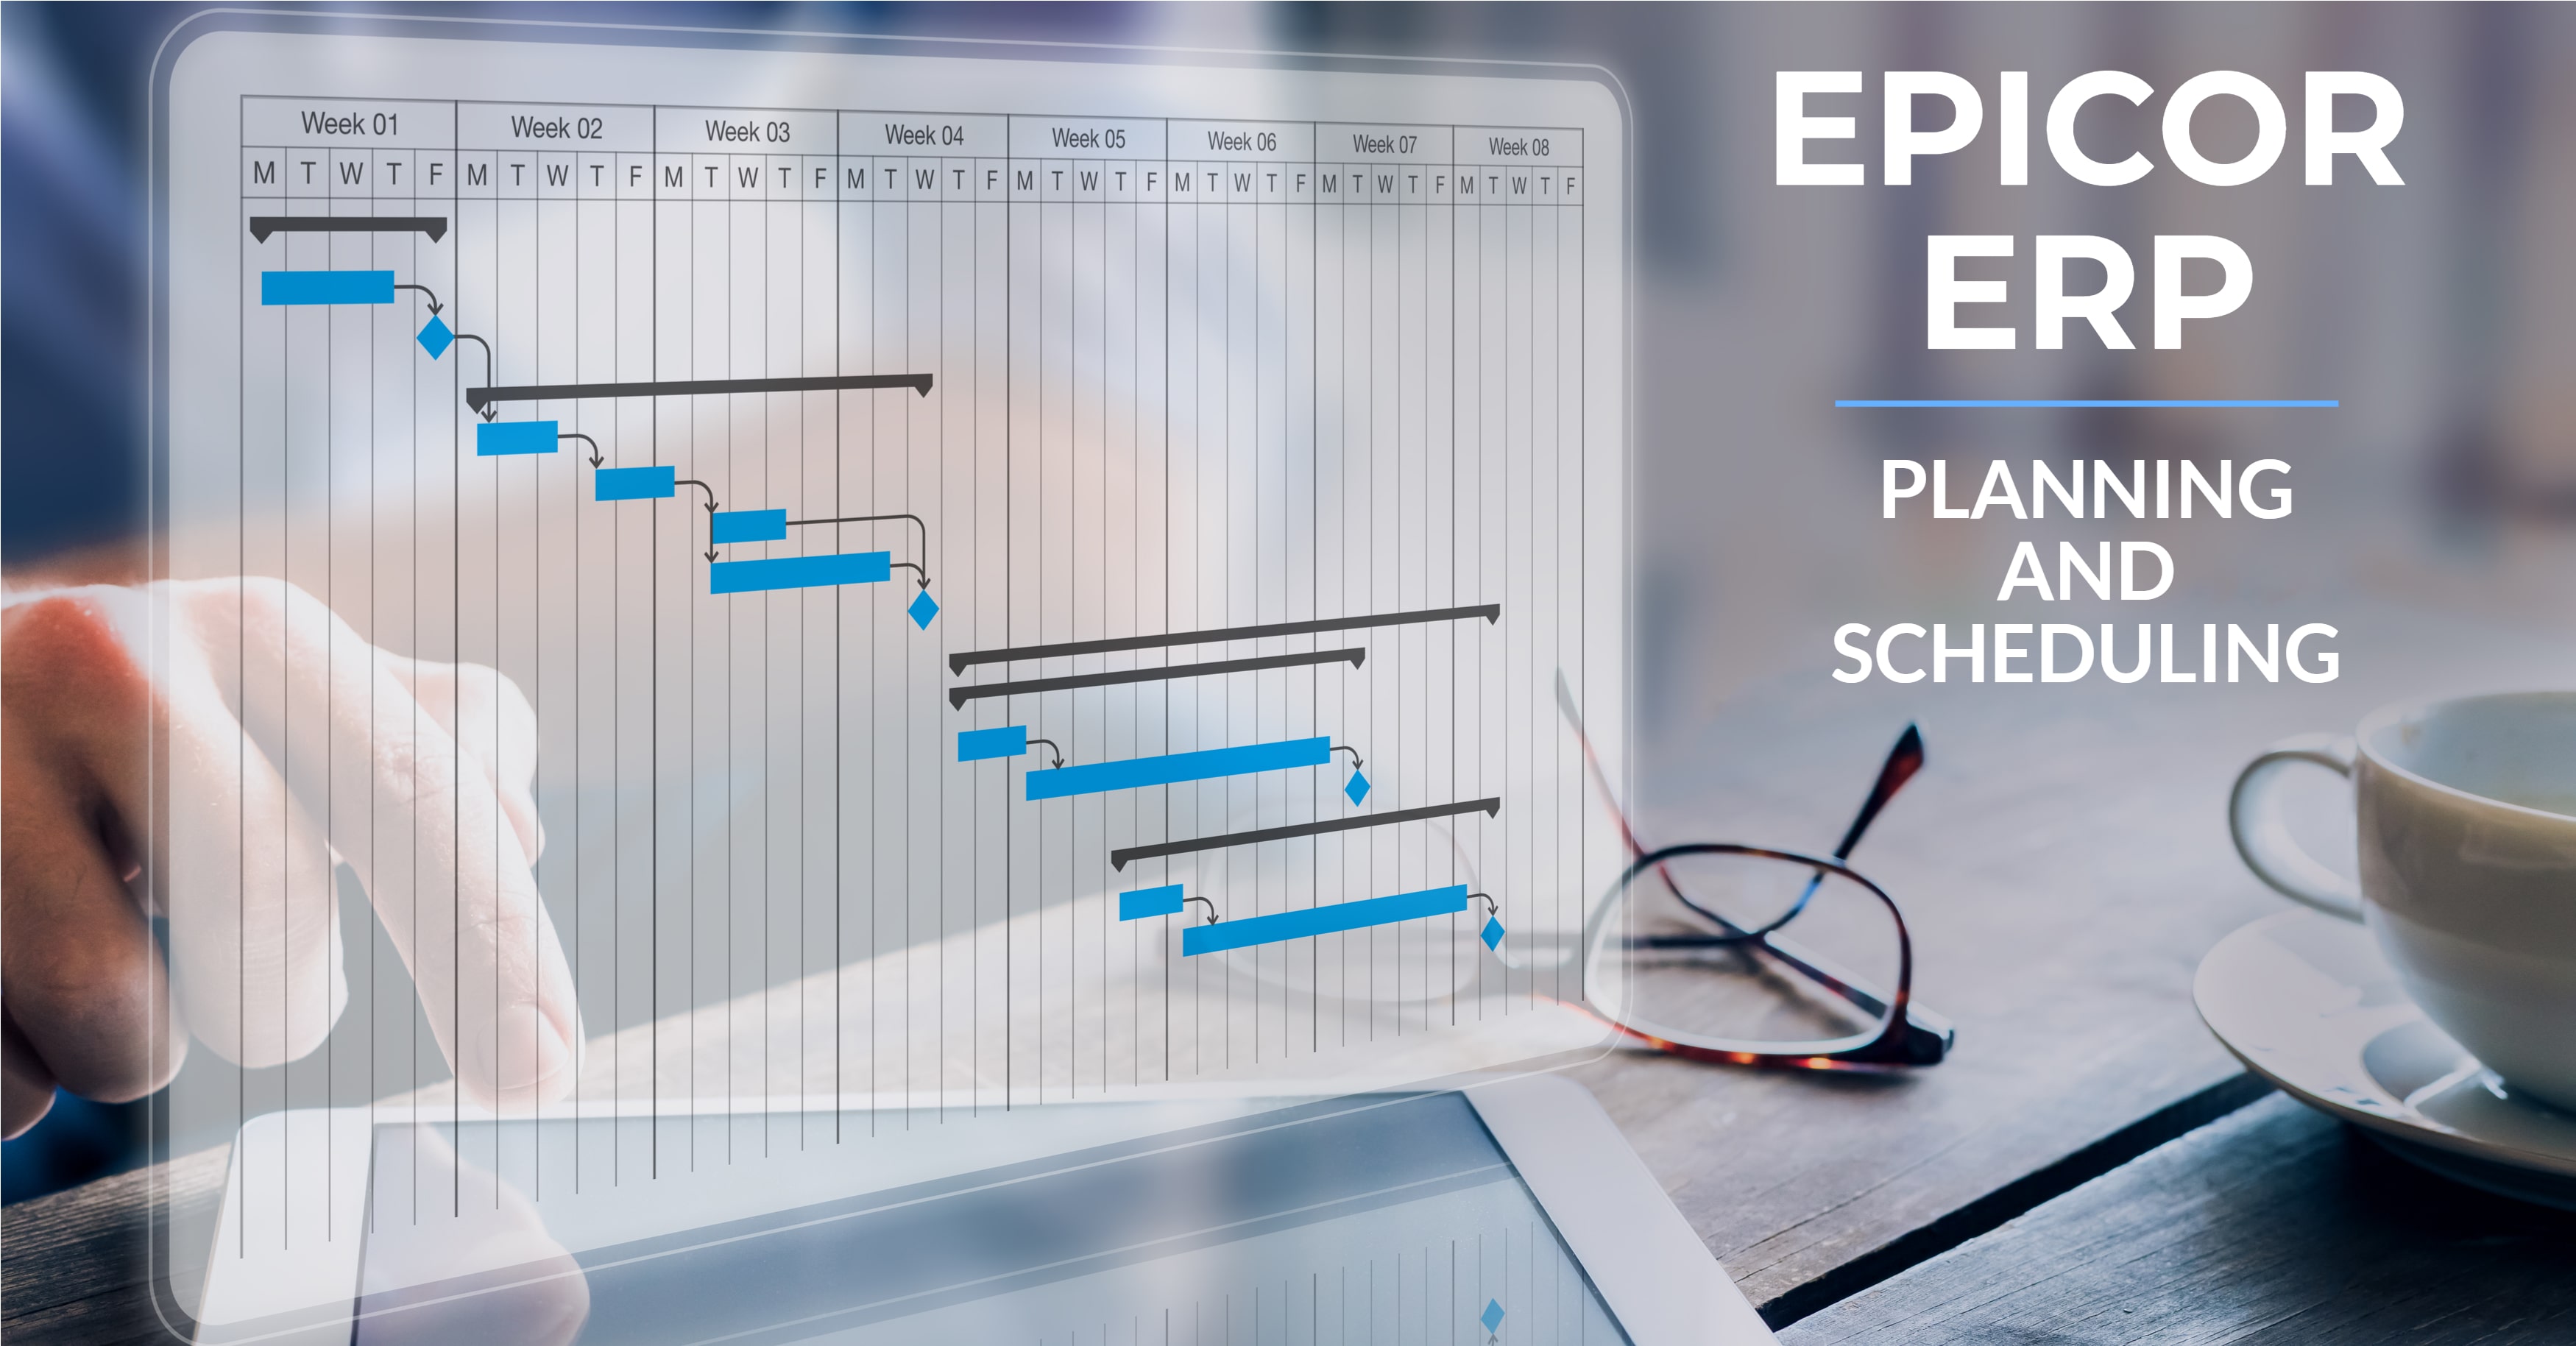 Epicor ERP Planning and Scheduling